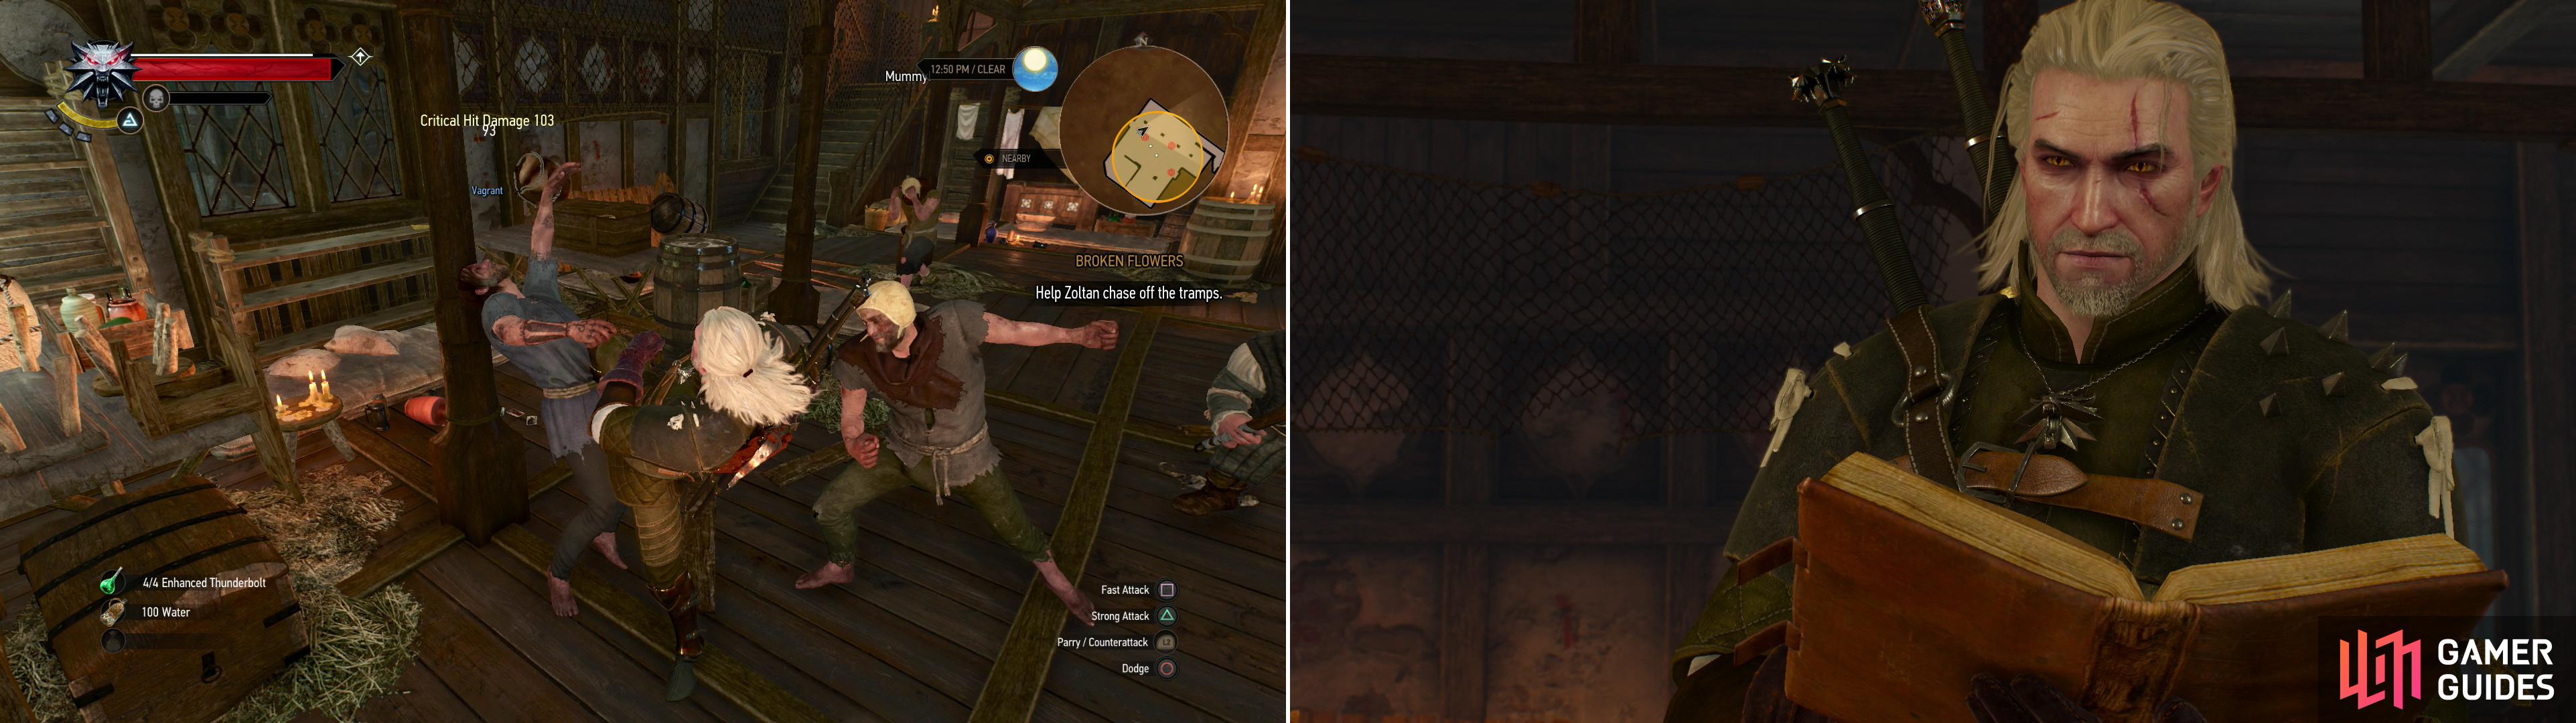 Help Zoltan fight off some squatters (left) then read Dandelion’s Planner to find out where he may have gone (right).